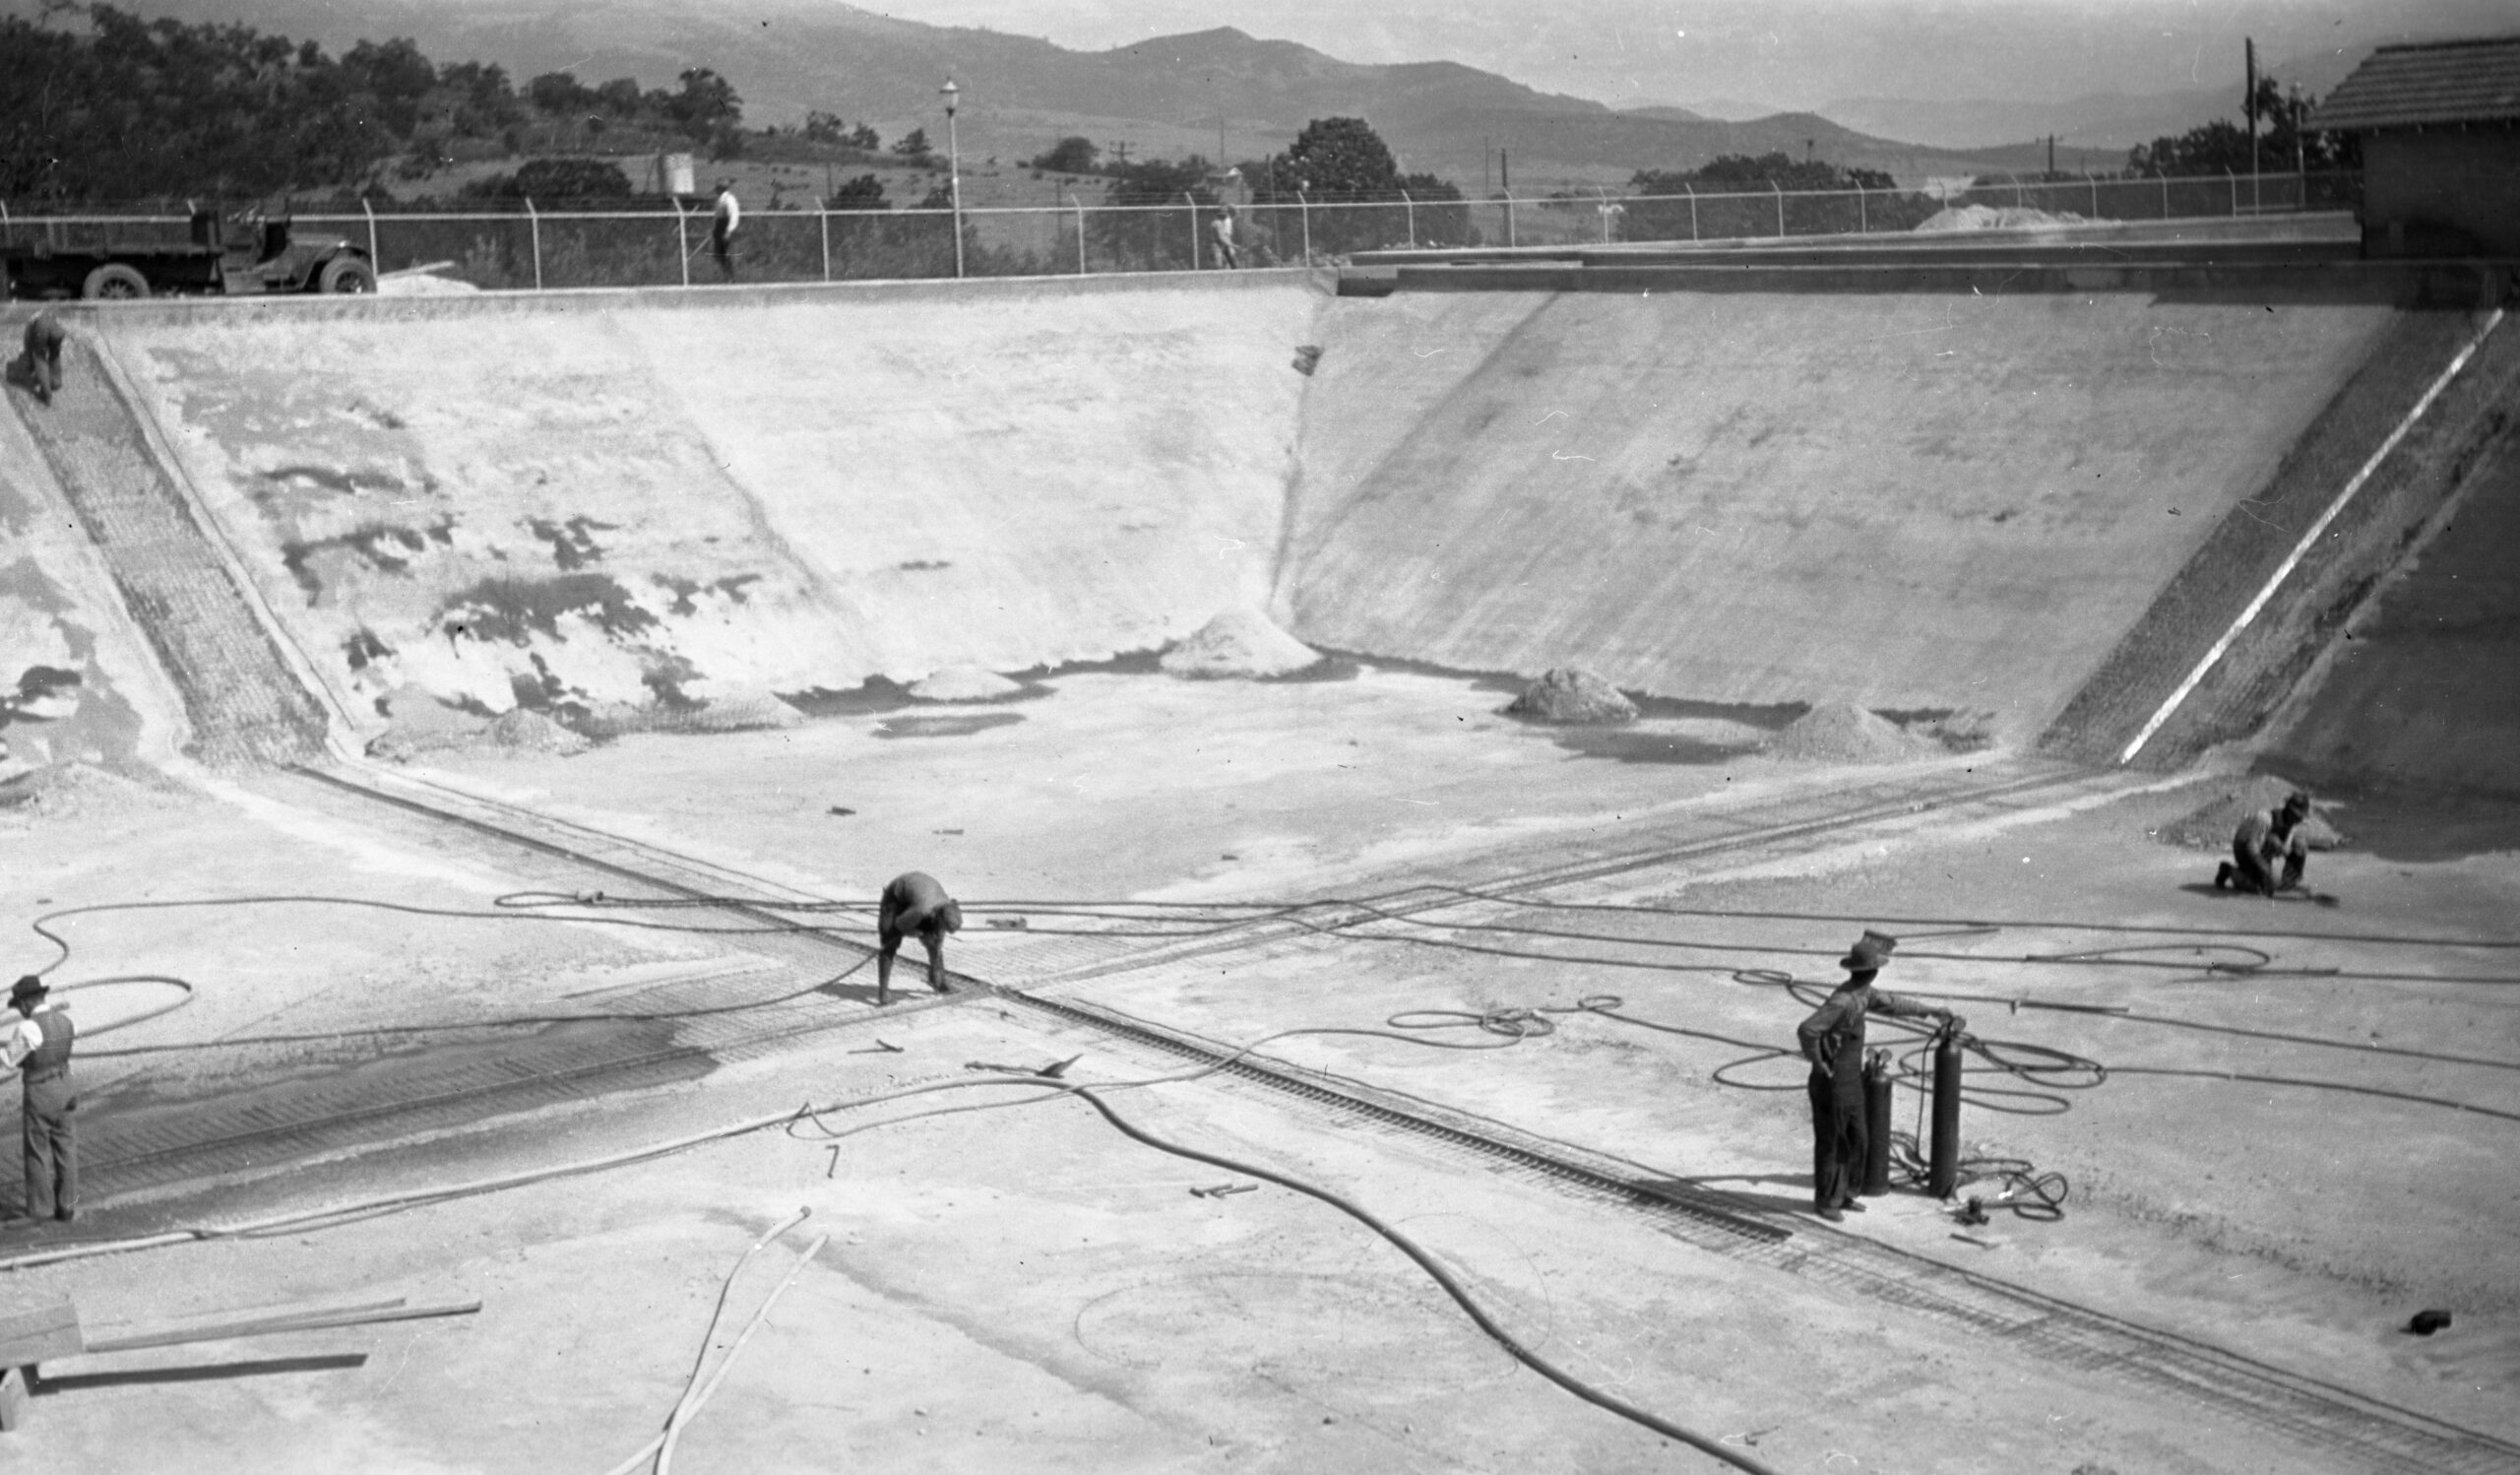 capital hill reservoir being created long ago in a black and white image